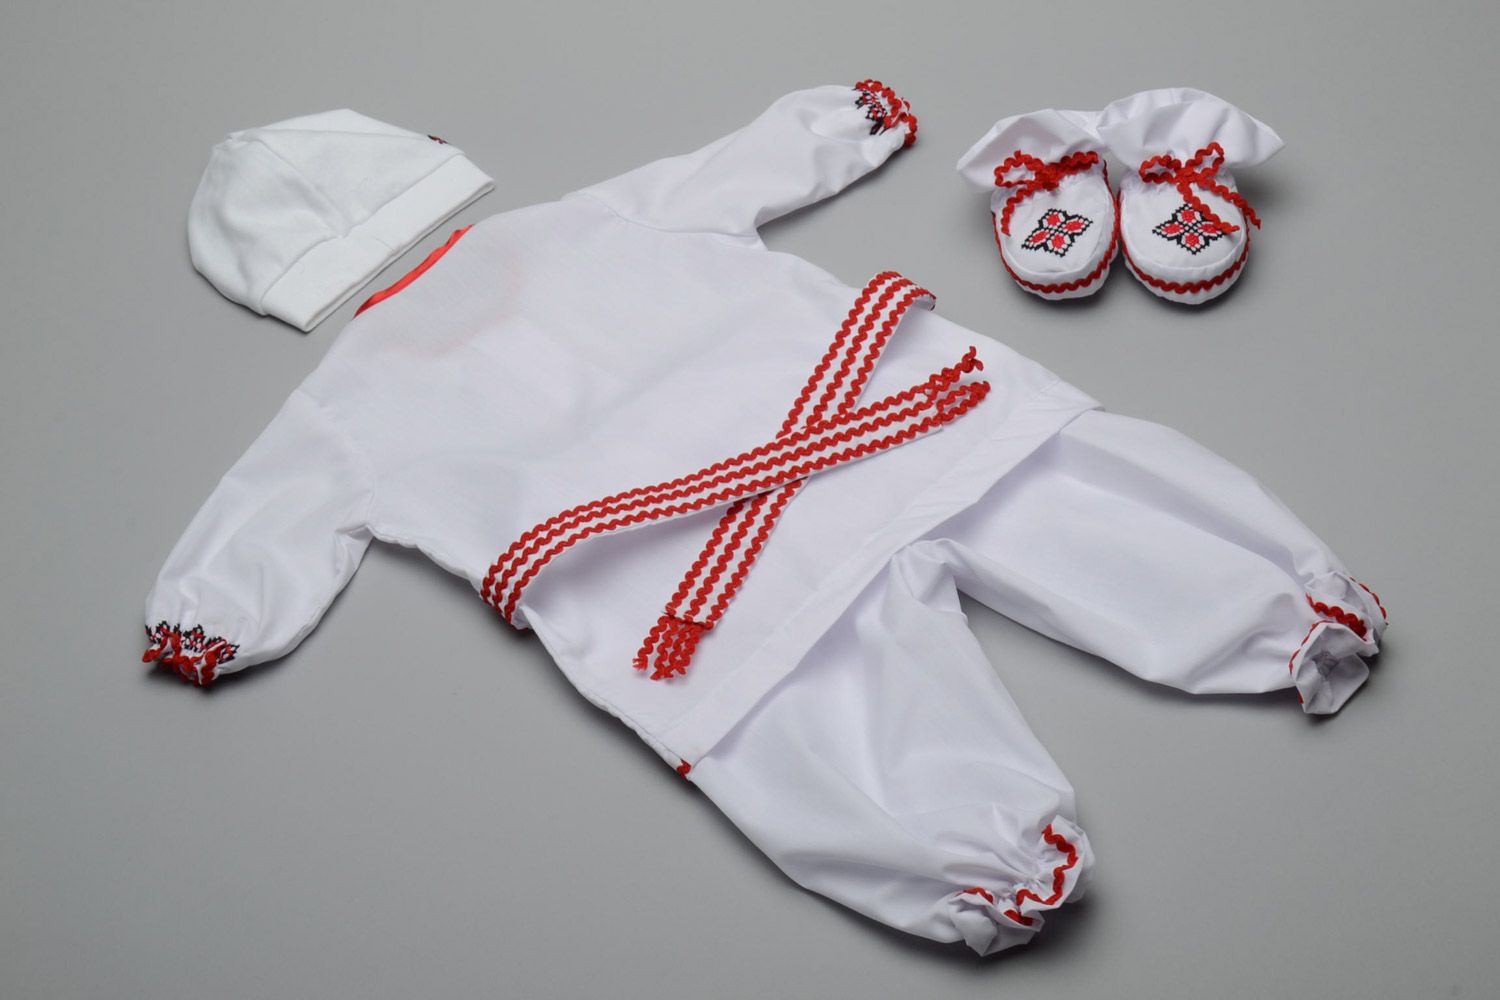 Handmade baby boy clothes set in ethnic style shirt pants hat belt and shoes photo 3